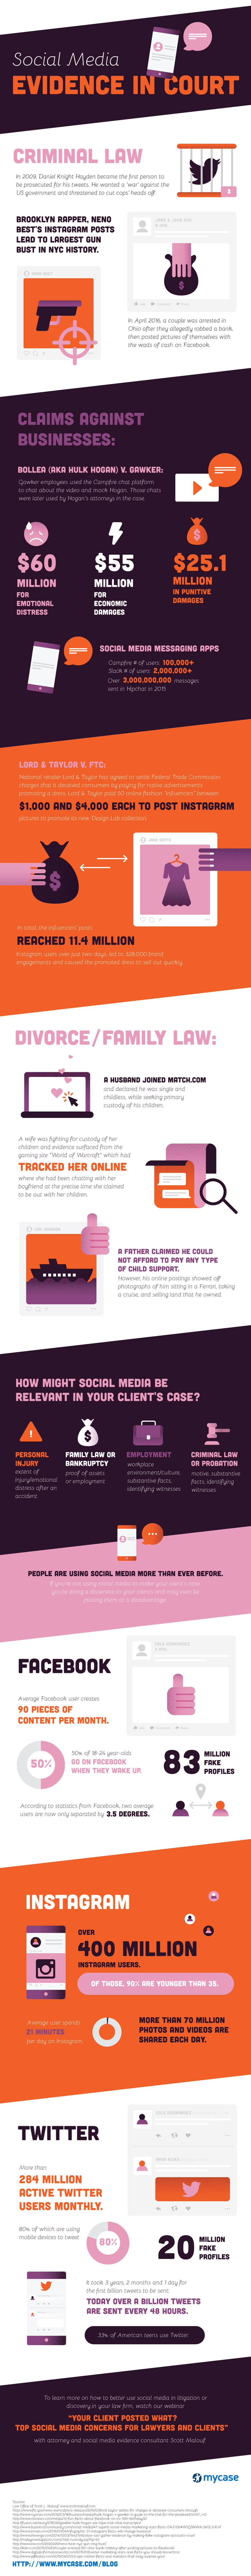 Social Media Evidence in a Court of Law infographic